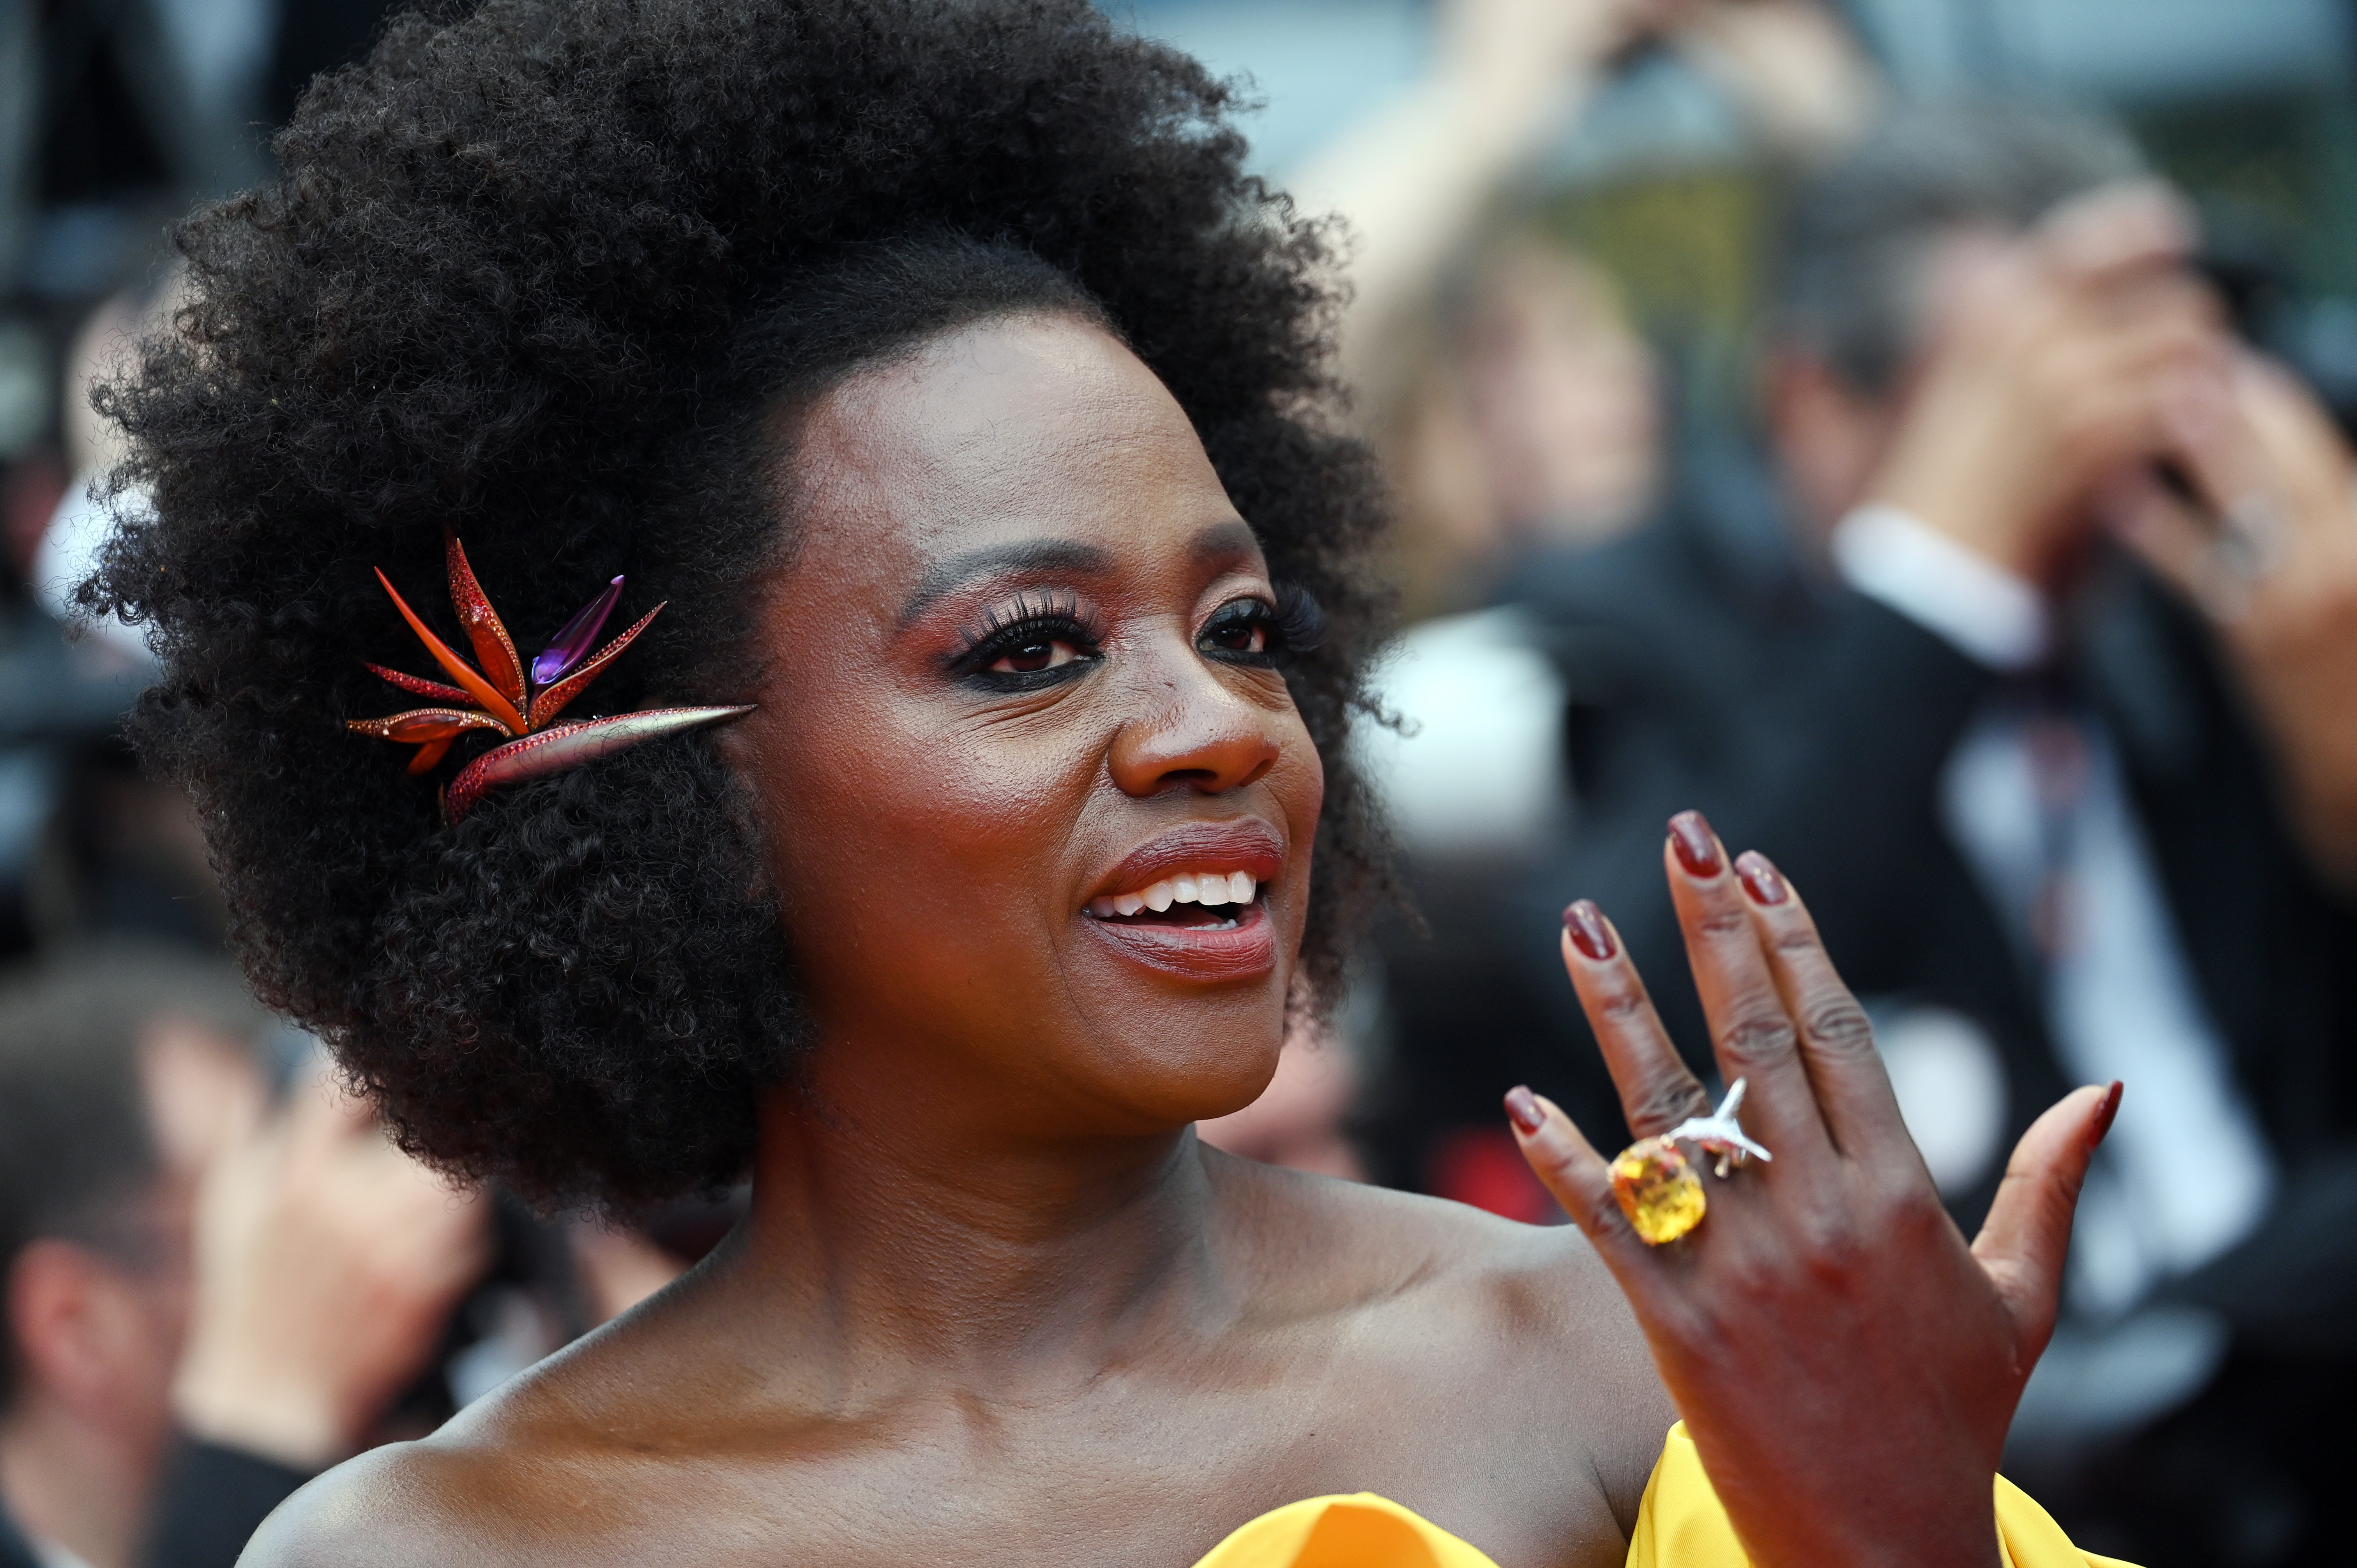 CANNES, FRANCE - MAY 18: Viola Davis attends the screening of "Top Gun: Maverick" during the 75th annual Cannes film festival at Palais des Festivals on May 18, 2022 in Cannes, France. (Photo by Joe Maher/Getty Images) (Foto: Getty Images)